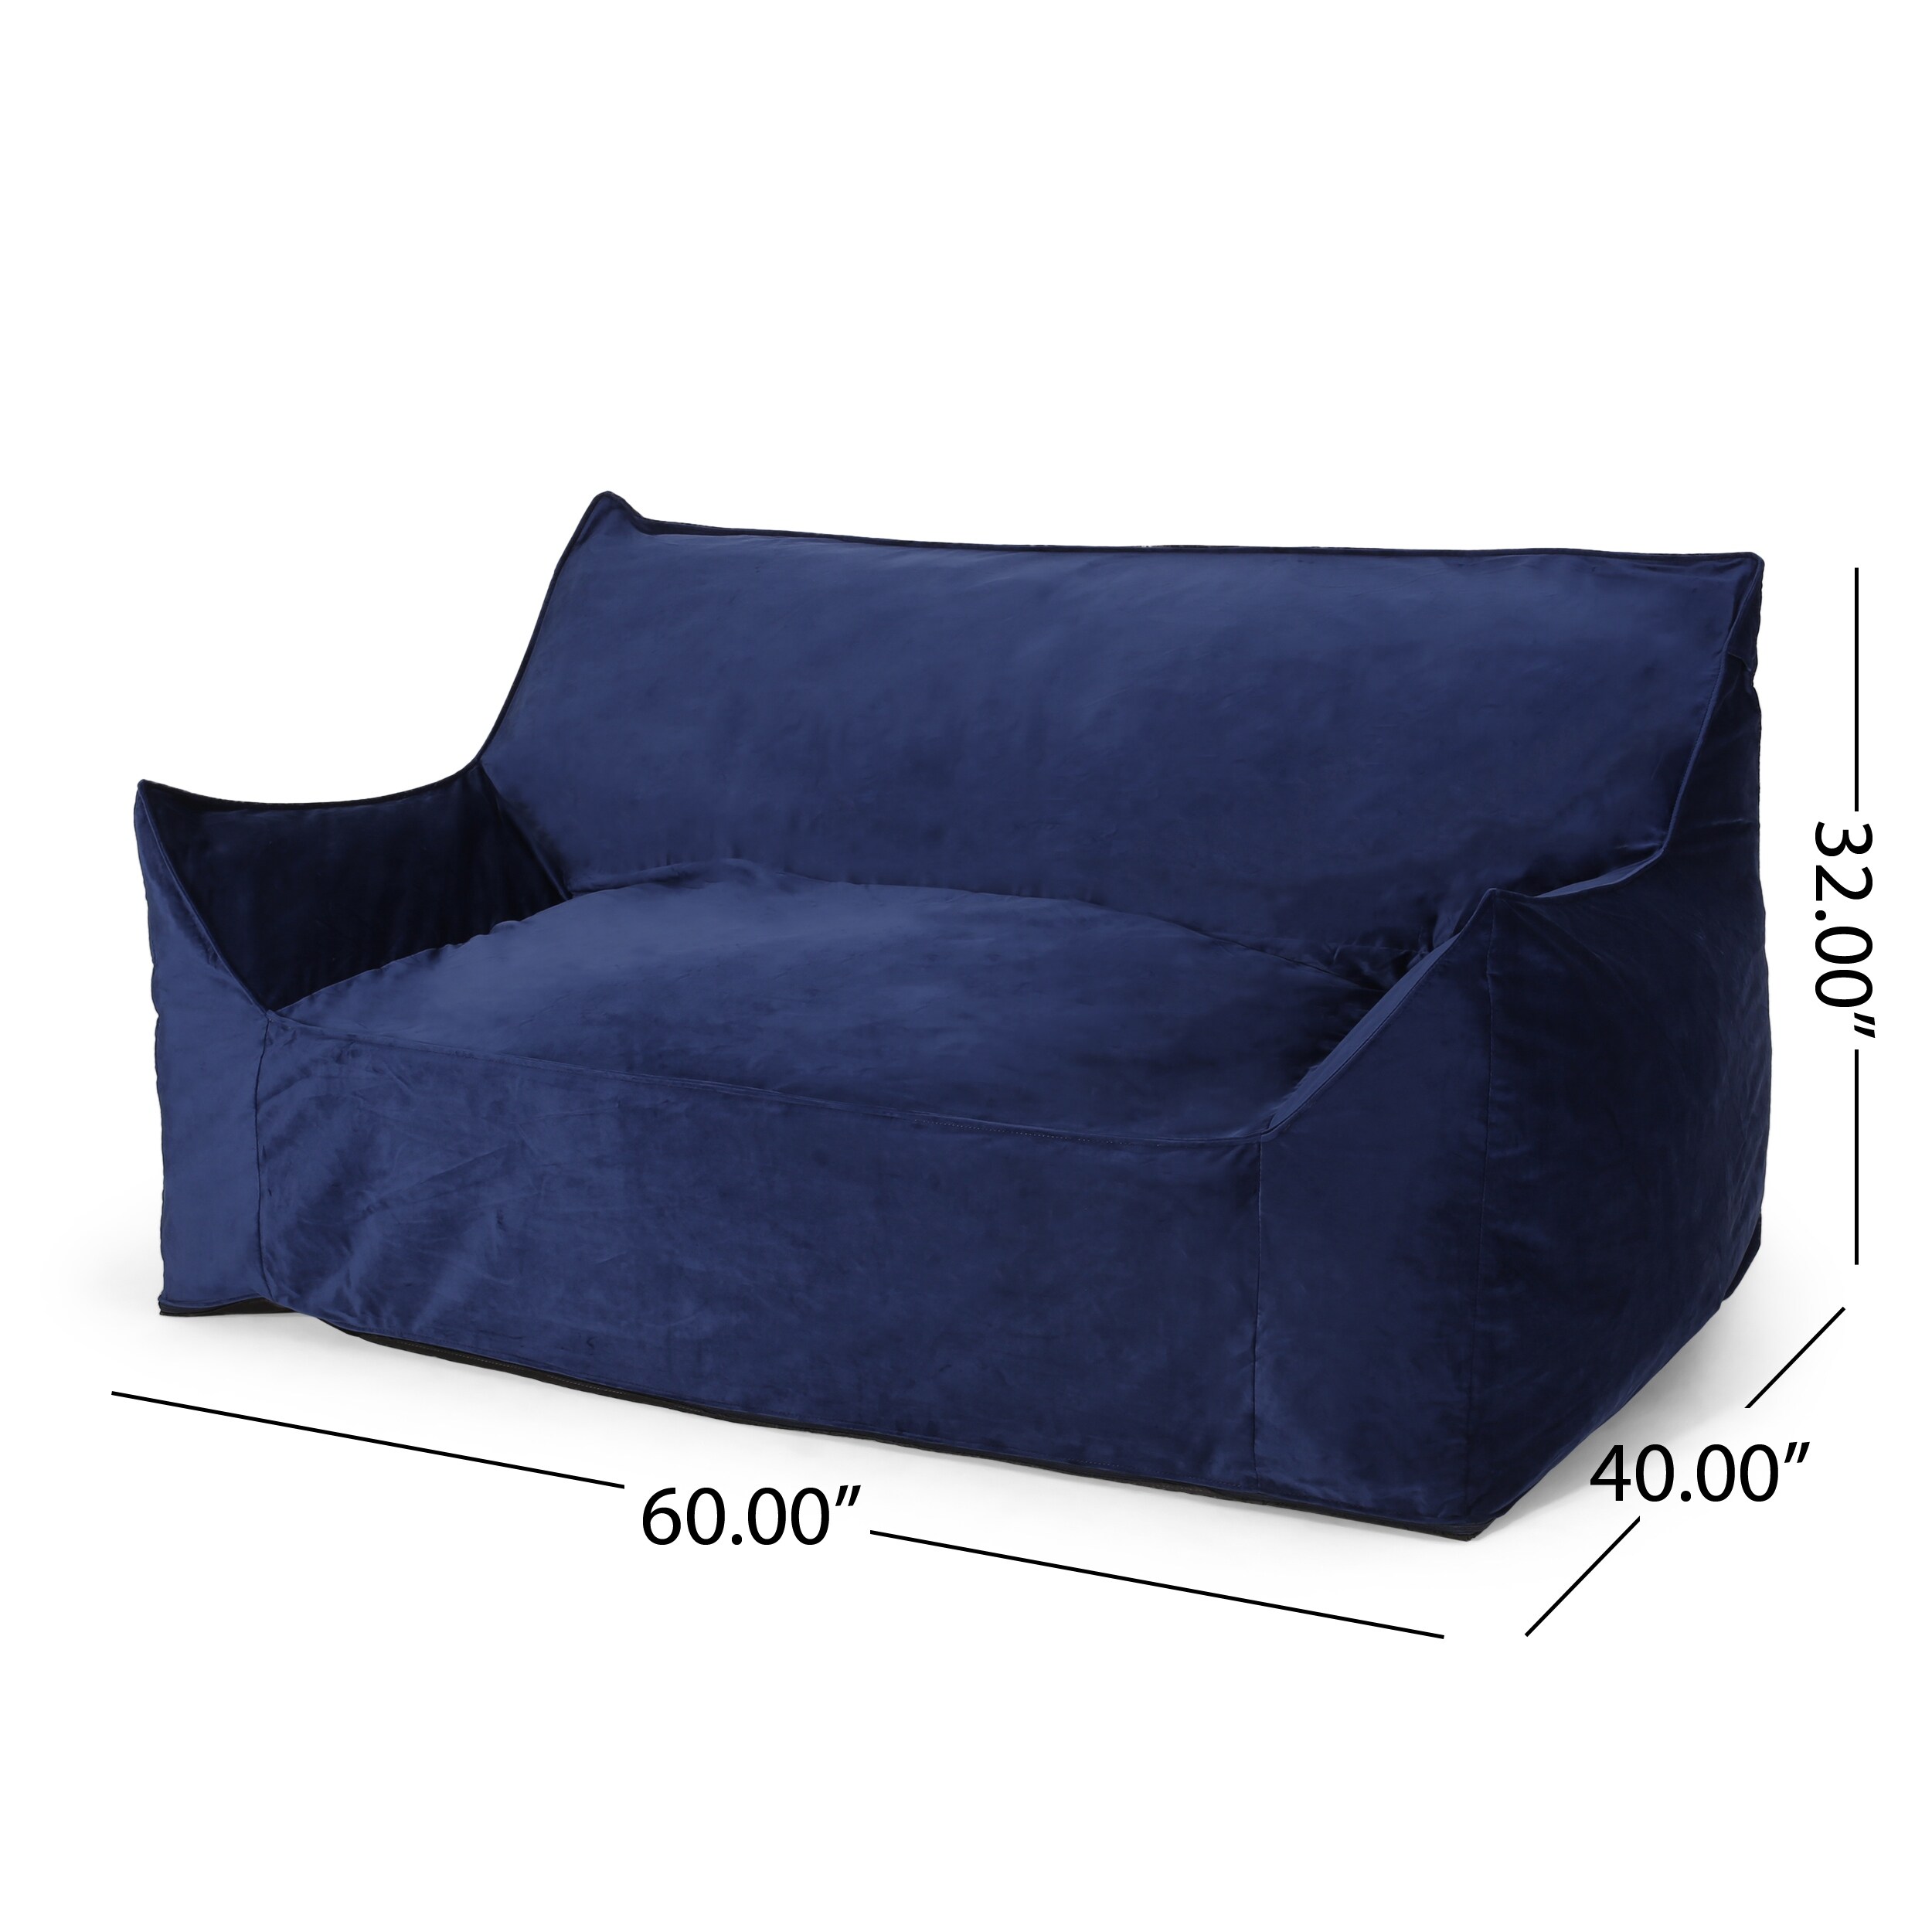 https://ak1.ostkcdn.com/images/products/is/images/direct/41fdaee25b94ecc24bc4594bb660d9fc126265e4/Velie-Velveteen-2-Seater-Oversized-Bean-Bag-Chair-with-Armrests-by-Christopher-Knight-Home.jpg